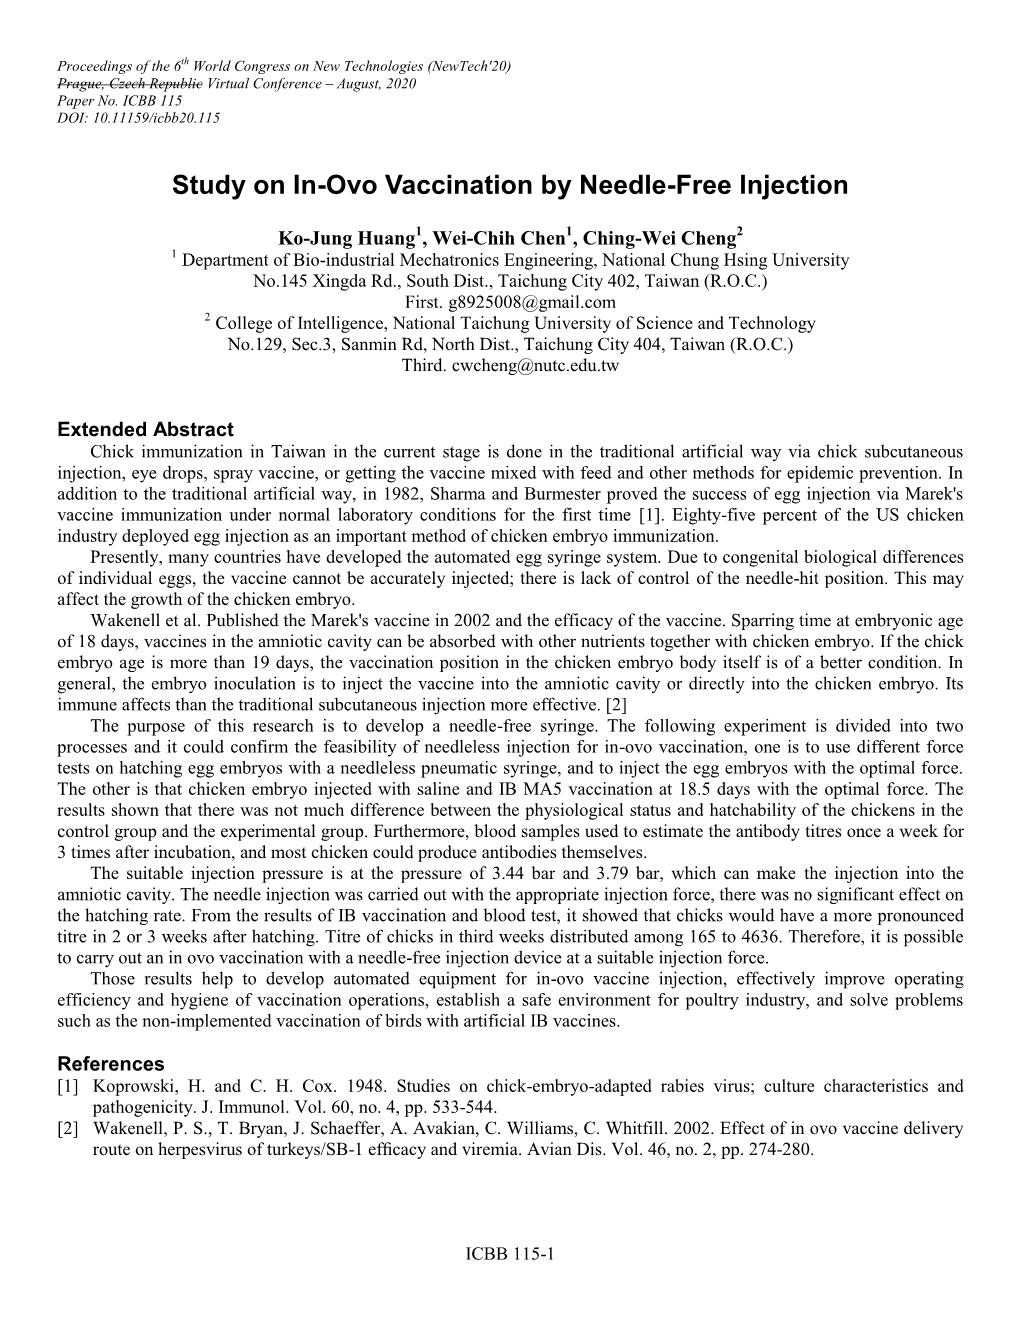 Study on In-Ovo Vaccination by Needle-Free Injection